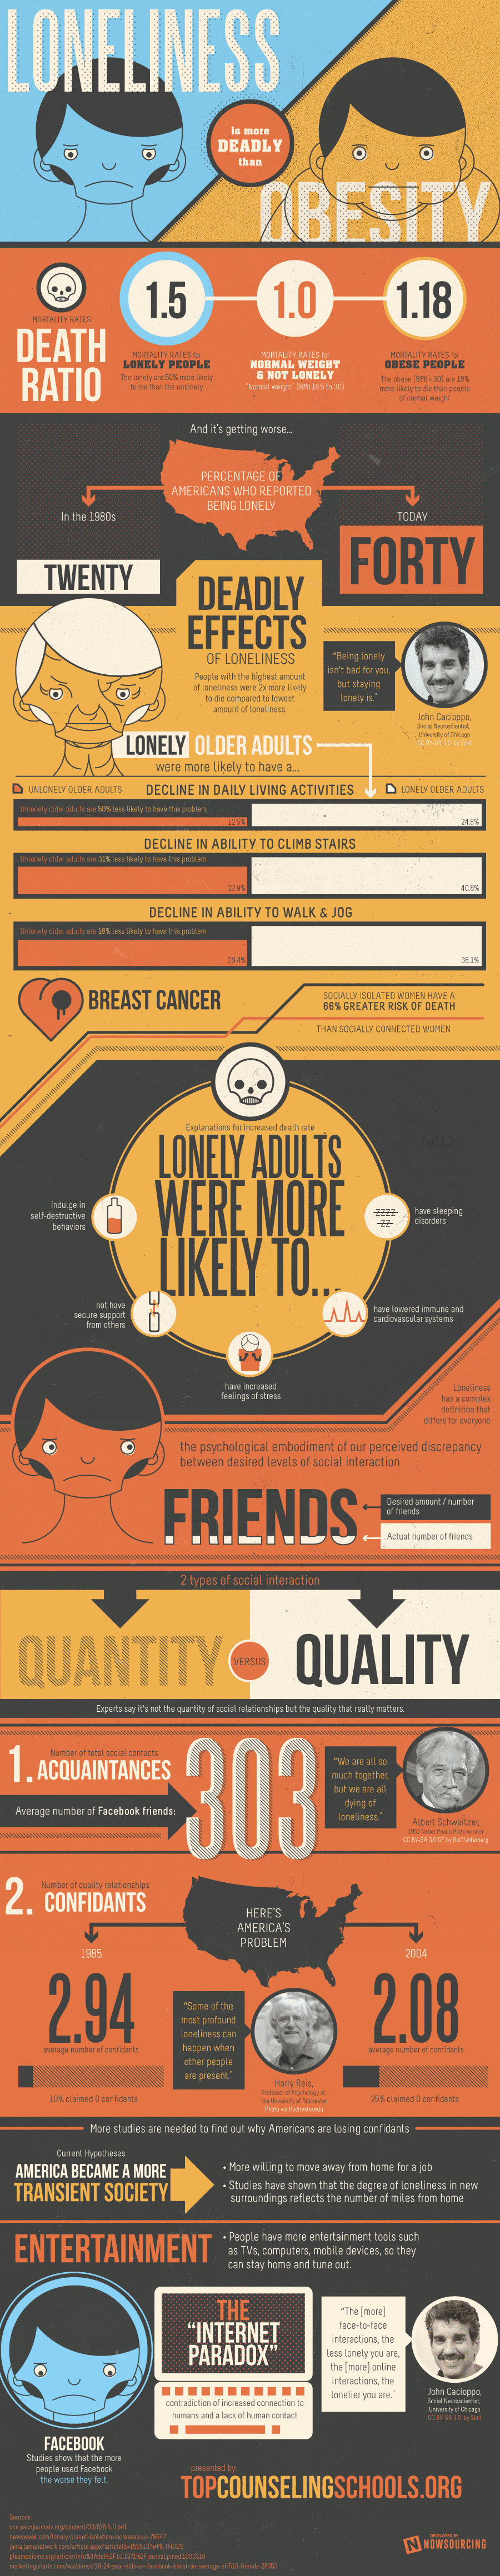 Loneliness is More Deadly Than Obesity